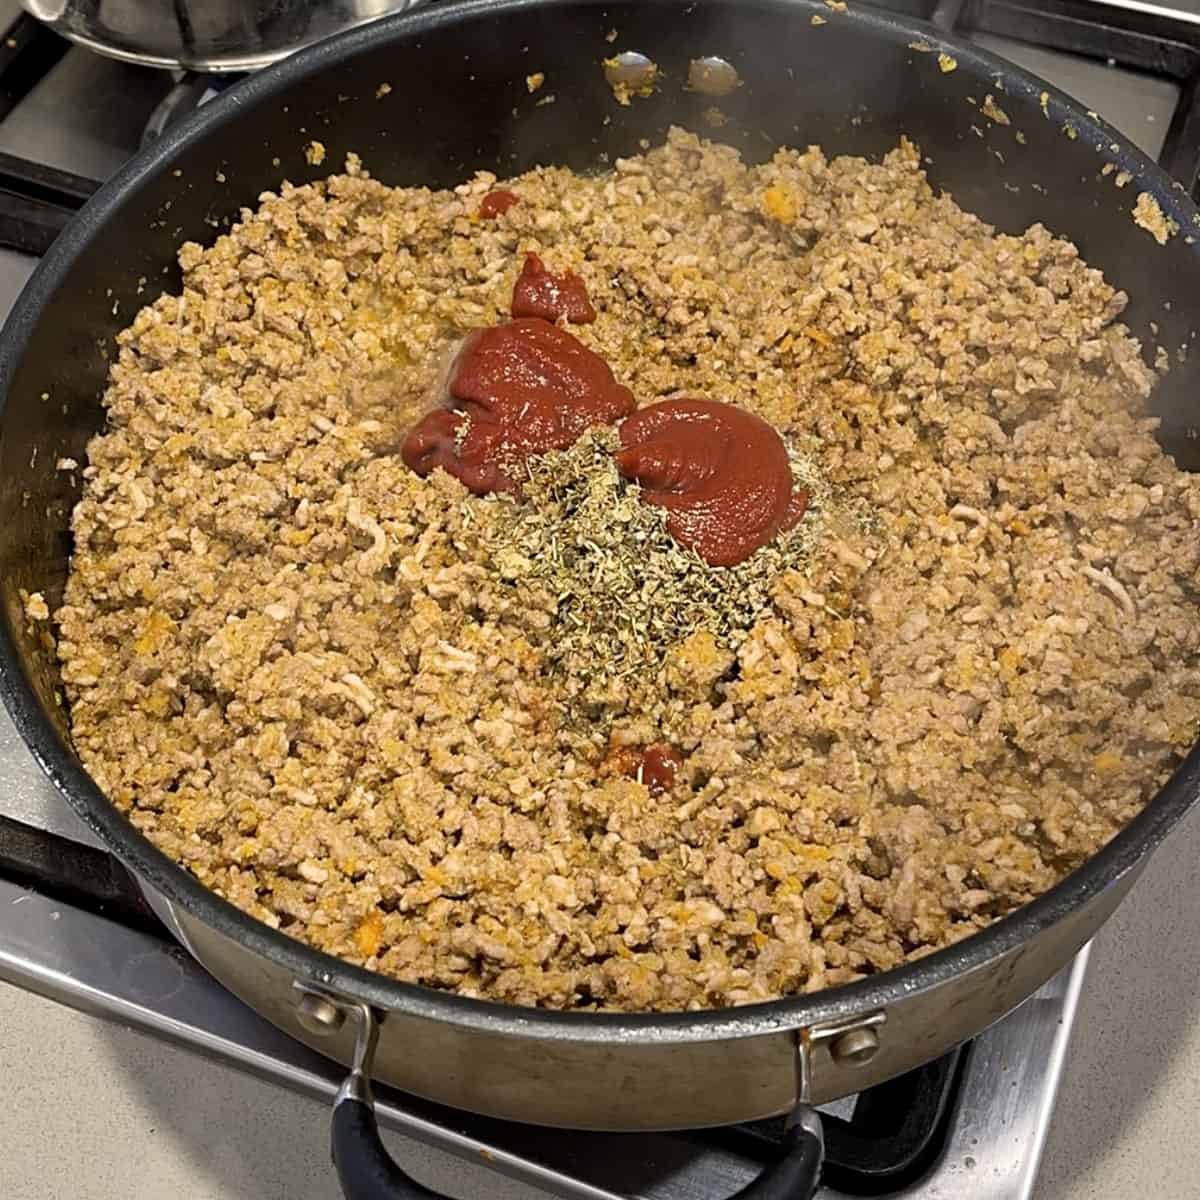 Mince and tomato paste in a fry pan.